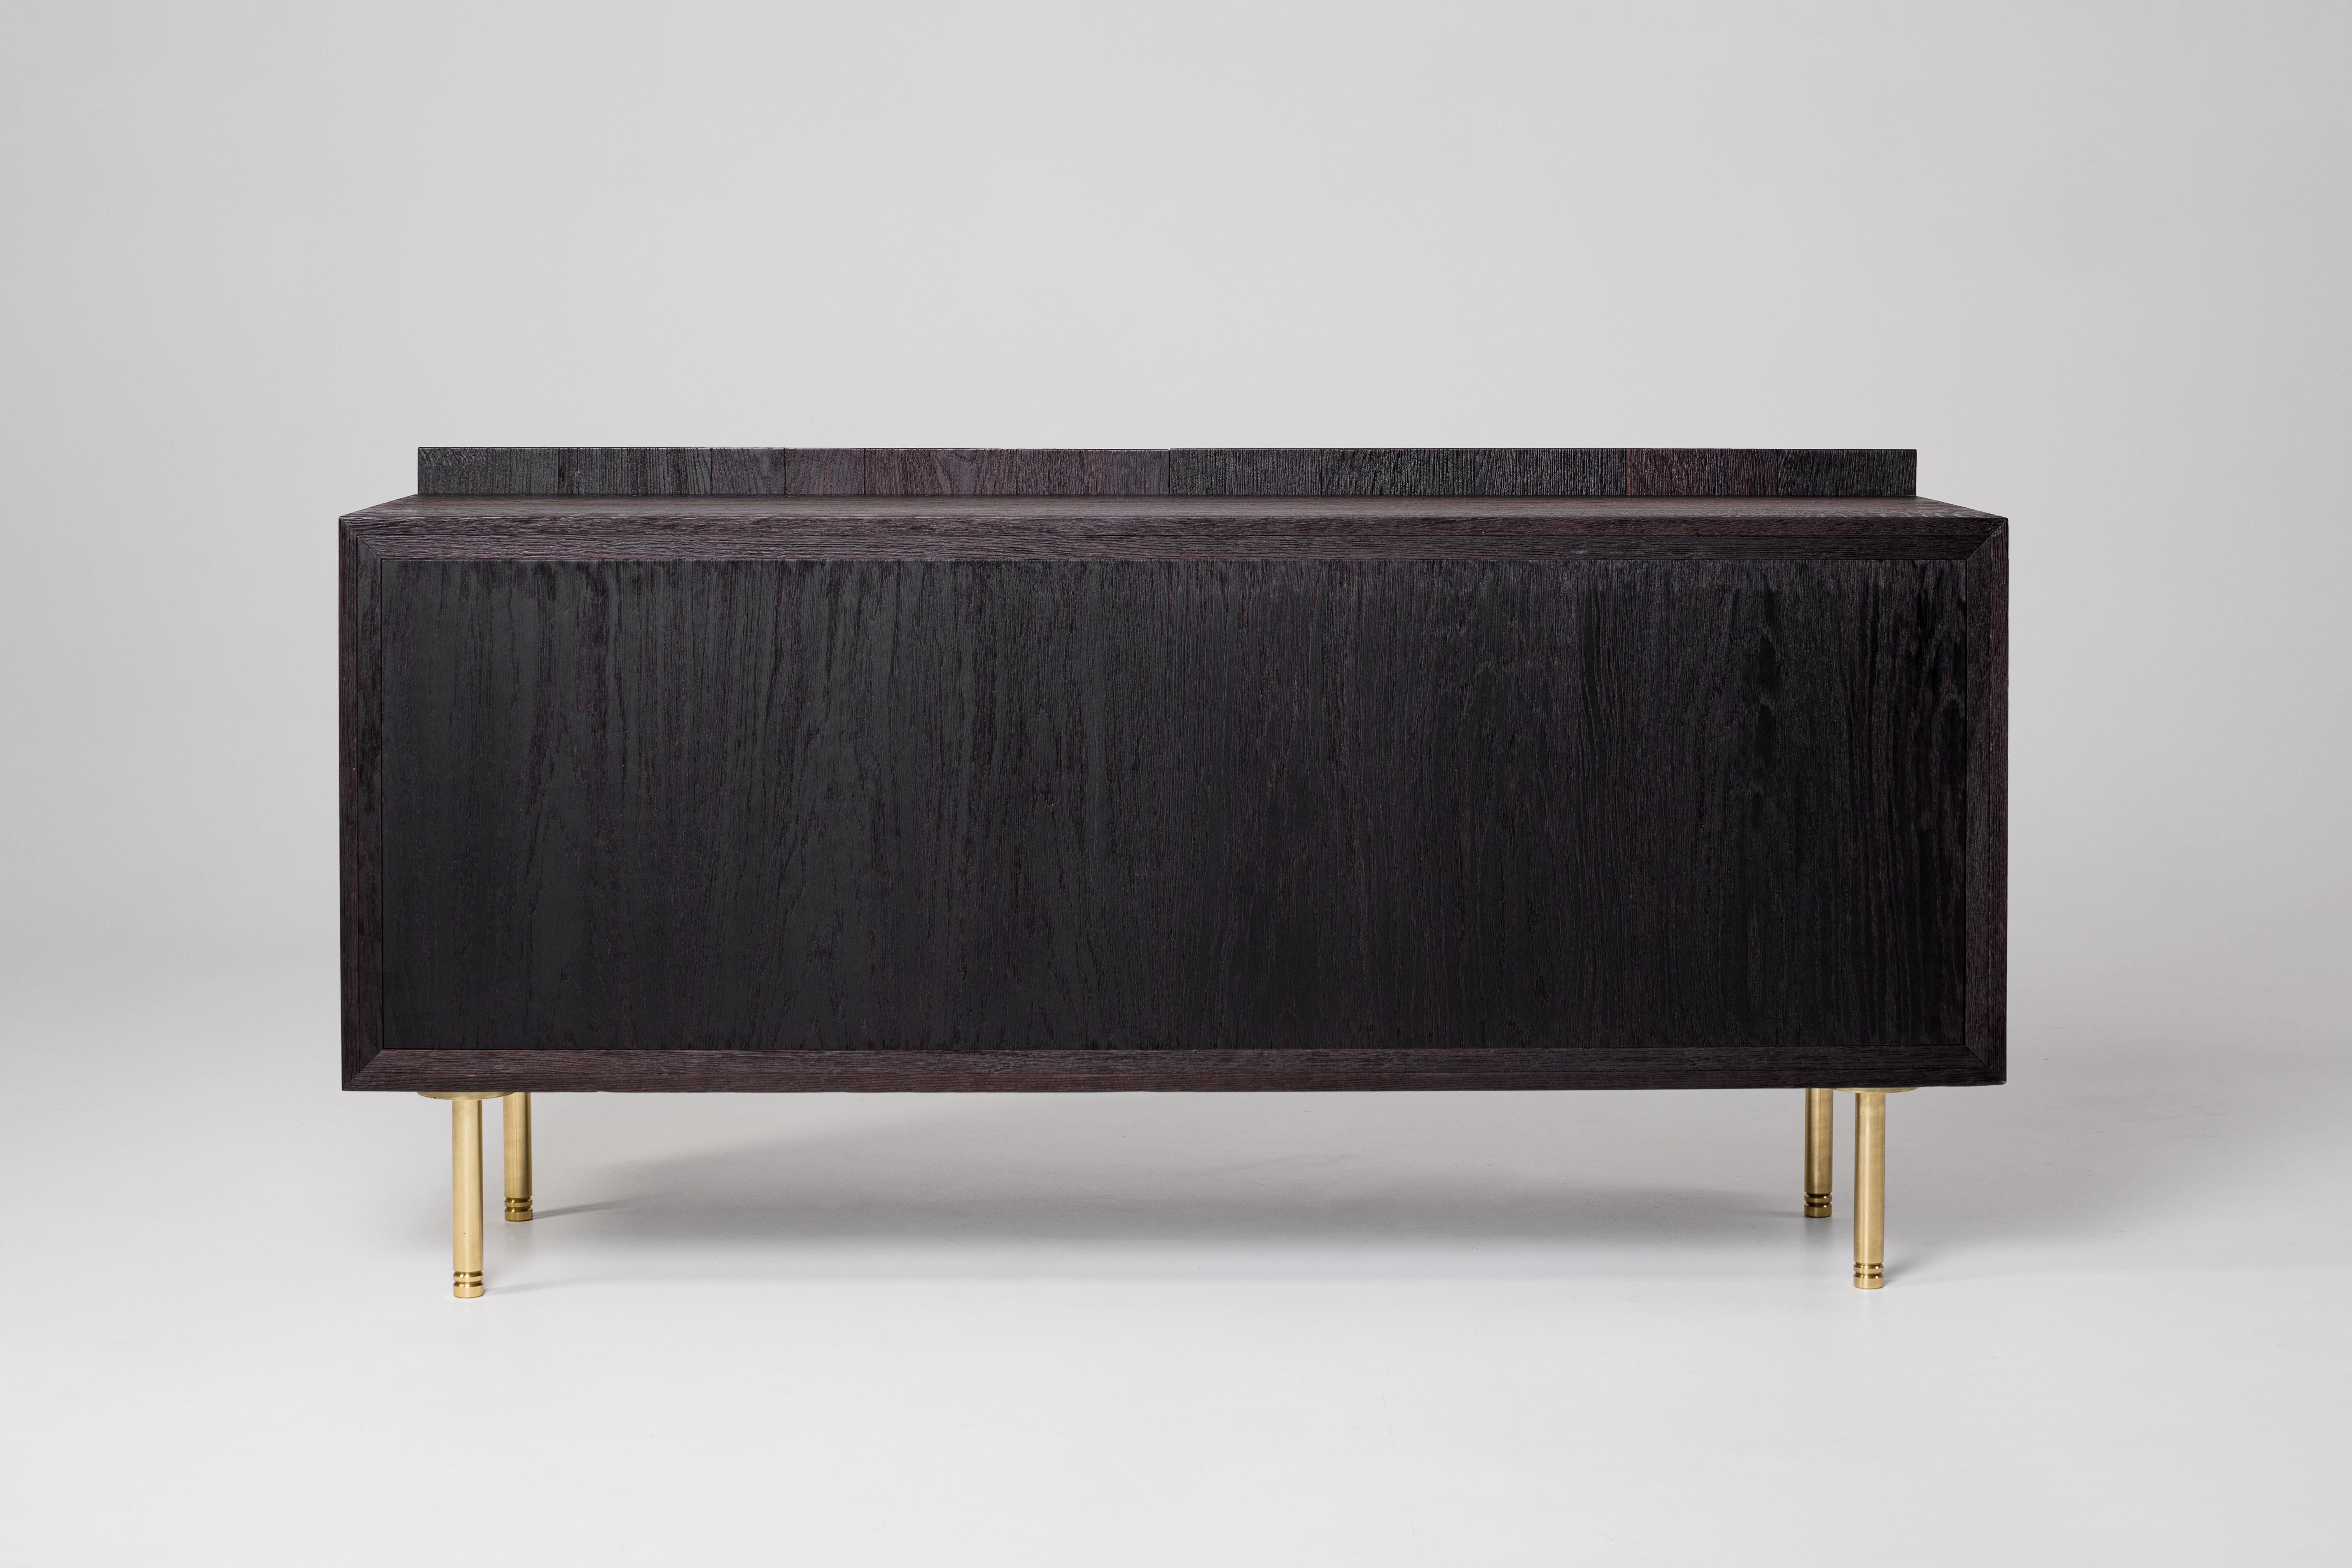 Contemporary Splendid Wooden (Solid Oak) Sideboard with Brass Details, Collection Golden Gate For Sale